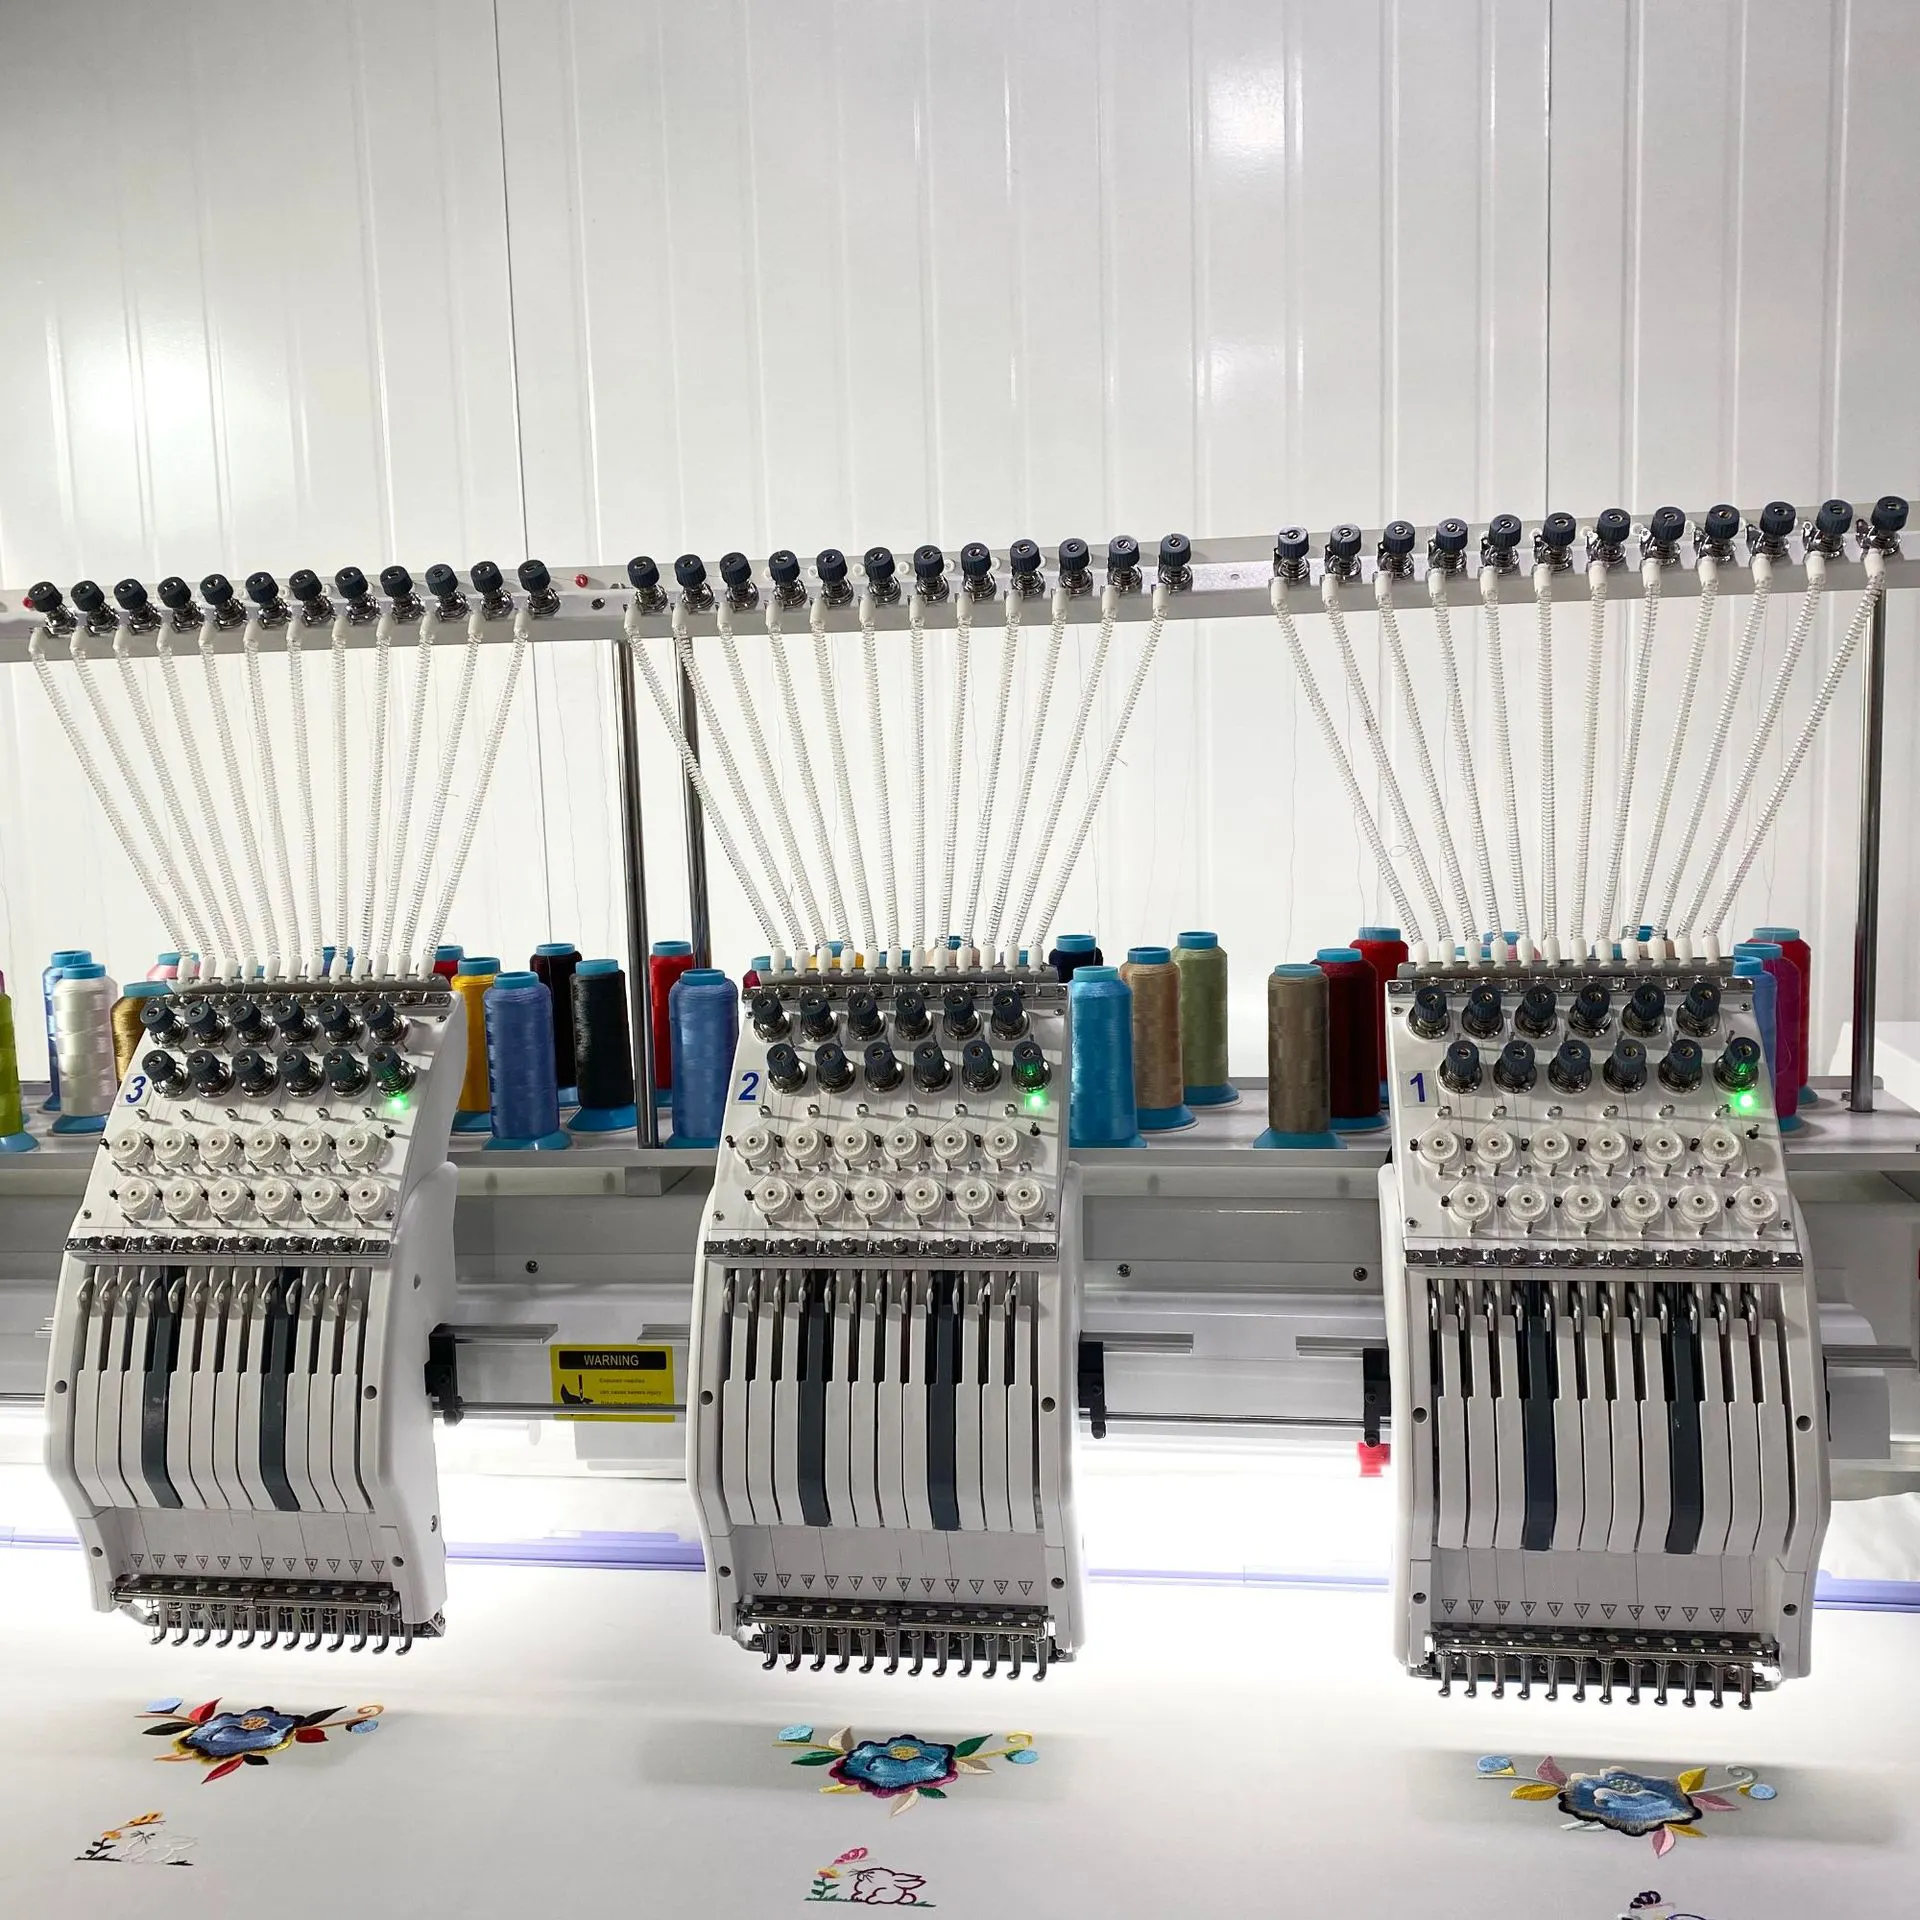 4 heads embroidery machine Industrial computerized 9/12/15 needles socks embroidery device DAHAO computer